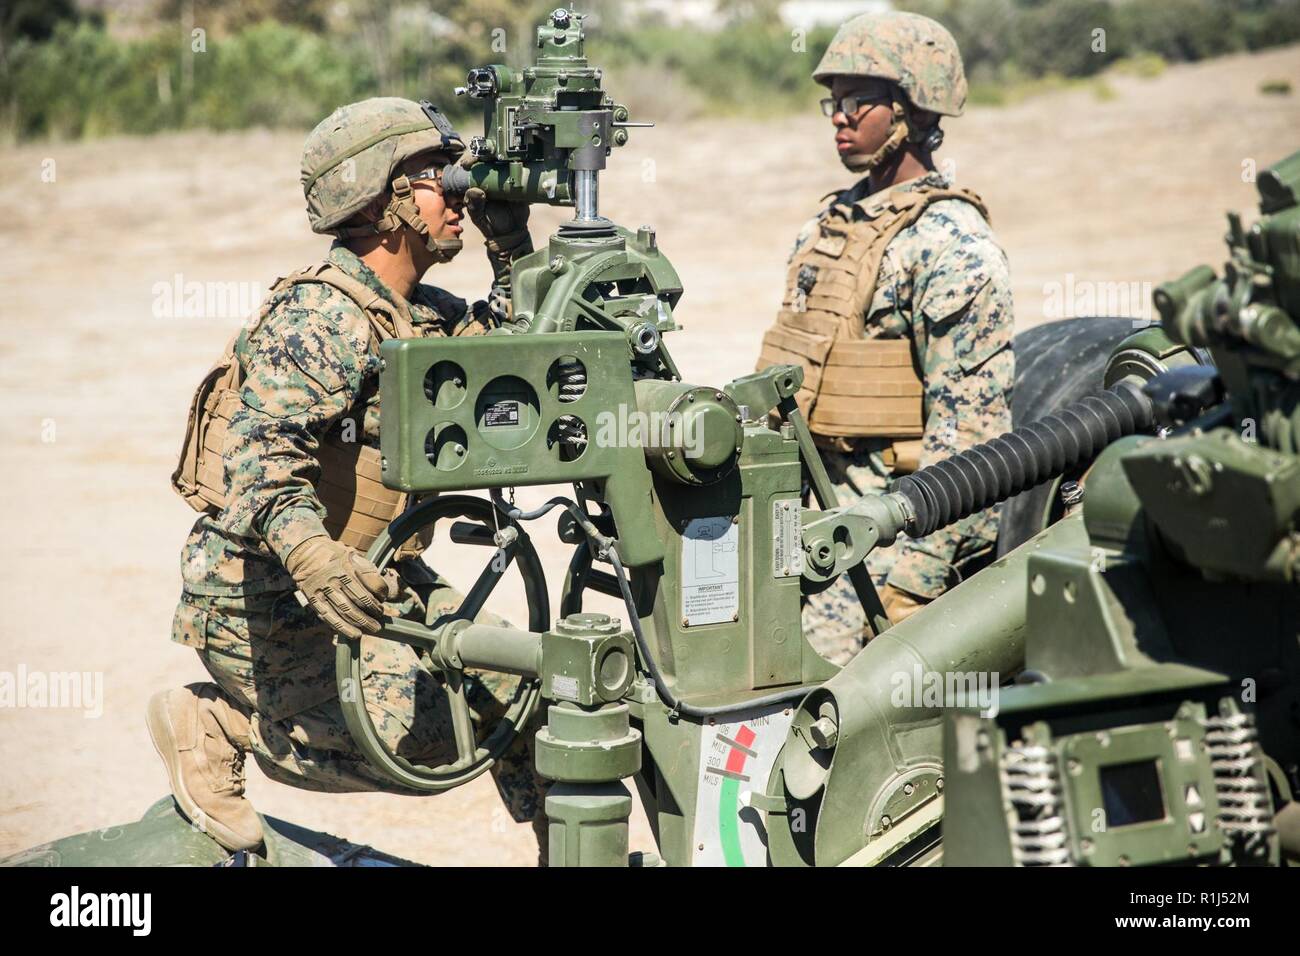 U.S Marine Corps Cpl. Jorge Jimenez (left), field artillery cannoneer, India Battery, 3rd Battalion, 11th Marine Regiment, 1st Marine Division, looks through the sighting system of an M777 155mm Howitzer cannon during a Cannon Section Chief Course at Artillery Fire Area 18, Marine Corps Base Camp Pendleton, California, Sept. 27, 2018. The section chief is responsible for the safety of each Marine operating the Howitzer along with the training and proficiency of the section. Stock Photo